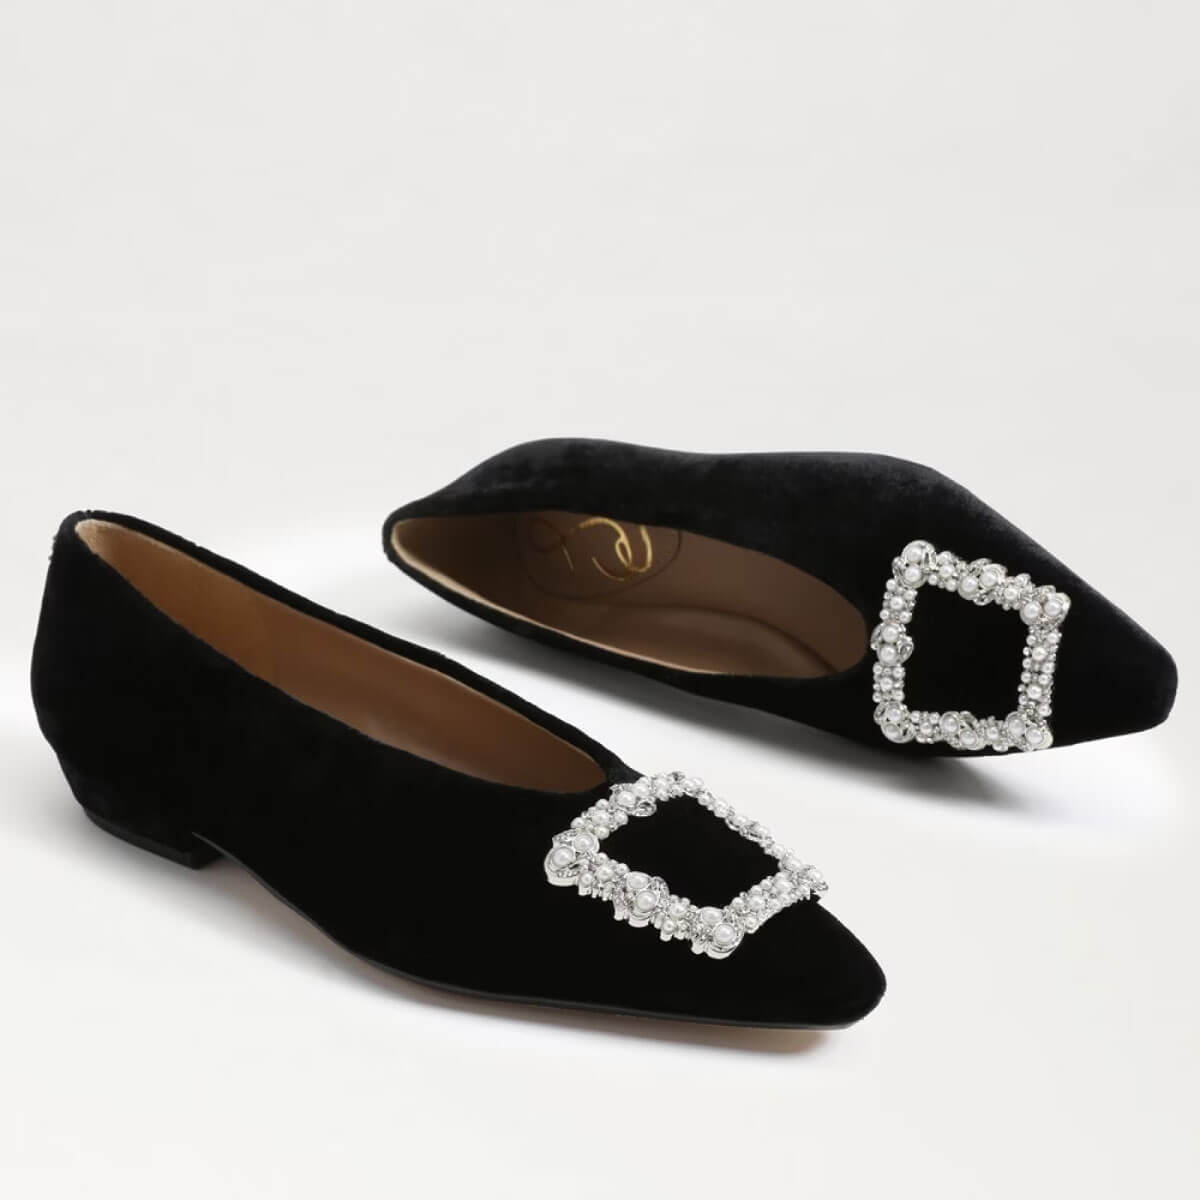 Sam Edelman Janna Luster Pointed Toe Flat black | MILK MONEY milkmoney.co | cute shoes for women. ladies shoes. nice shoes for women. footwear for women. ladies shoes online. ladies footwear. womens shoes and boots. pretty shoes for women. beautiful shoes for women. 